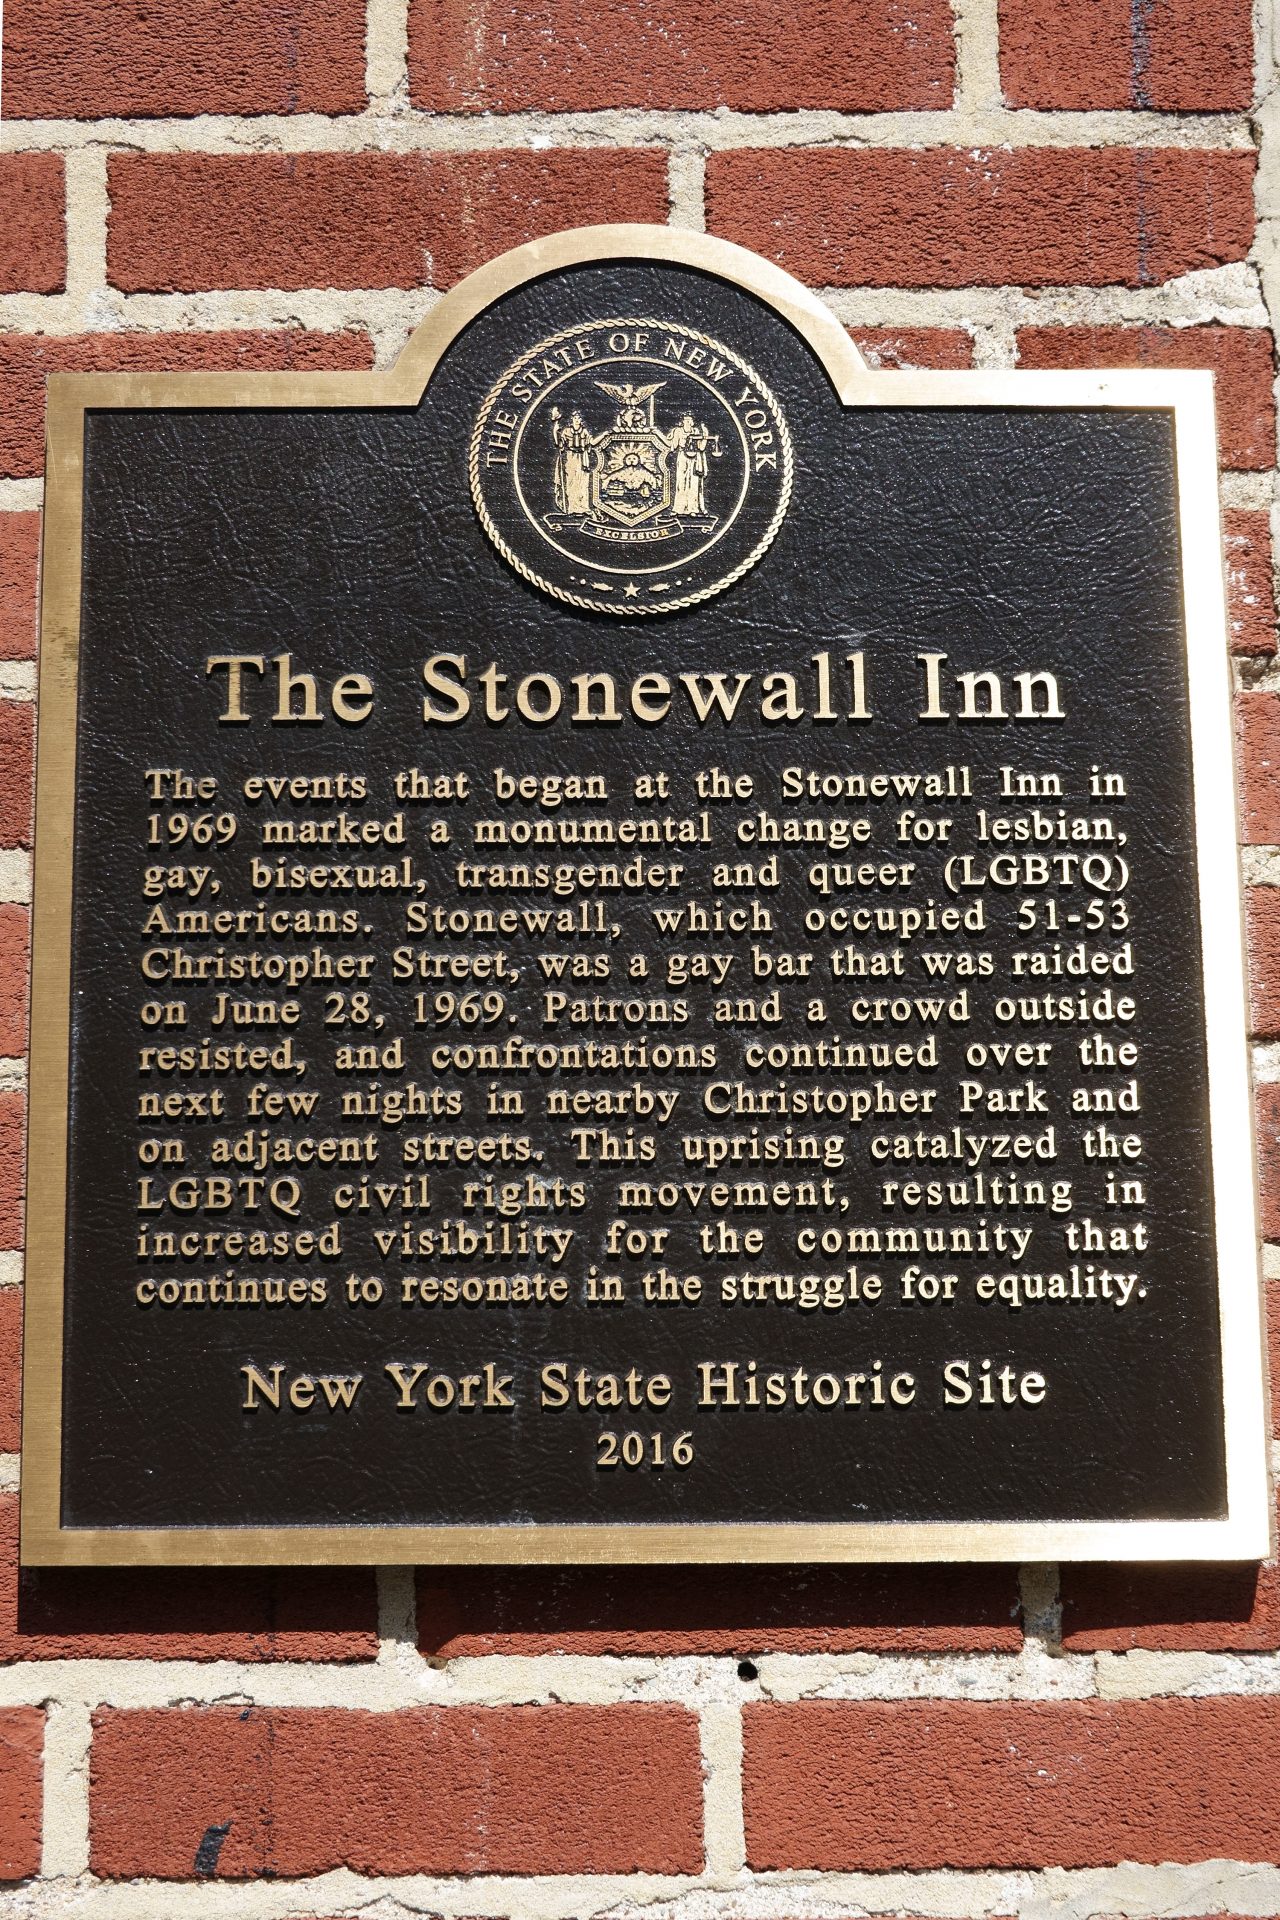 Expelled from Stonewall Inn